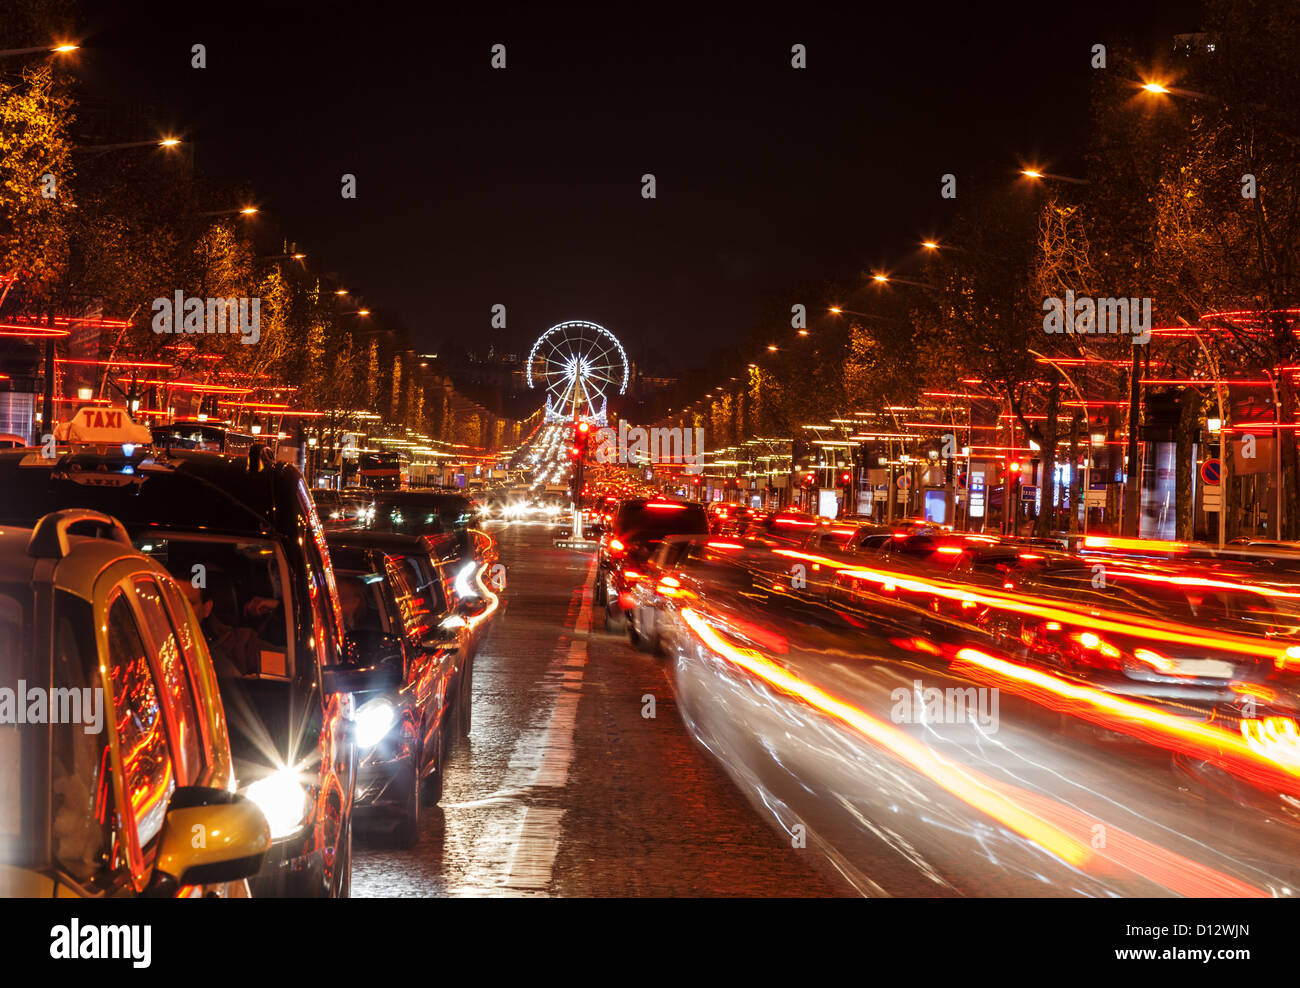 December illumination and traffic lights on the Avenue des Champs-Élysées in Paris,Europe. Stock Photo